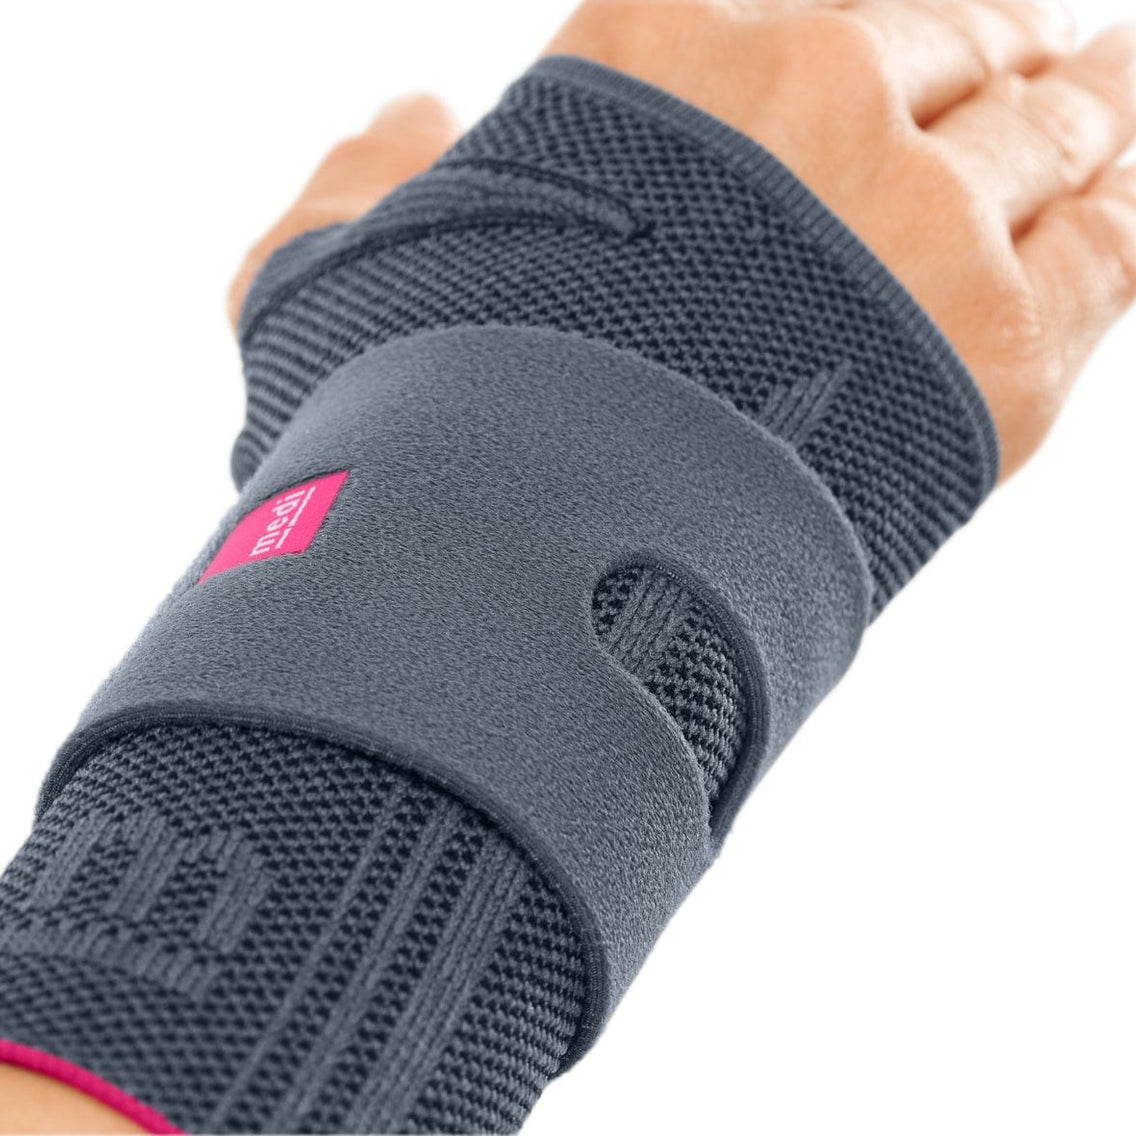 Manumed active Wrist Support, Silver